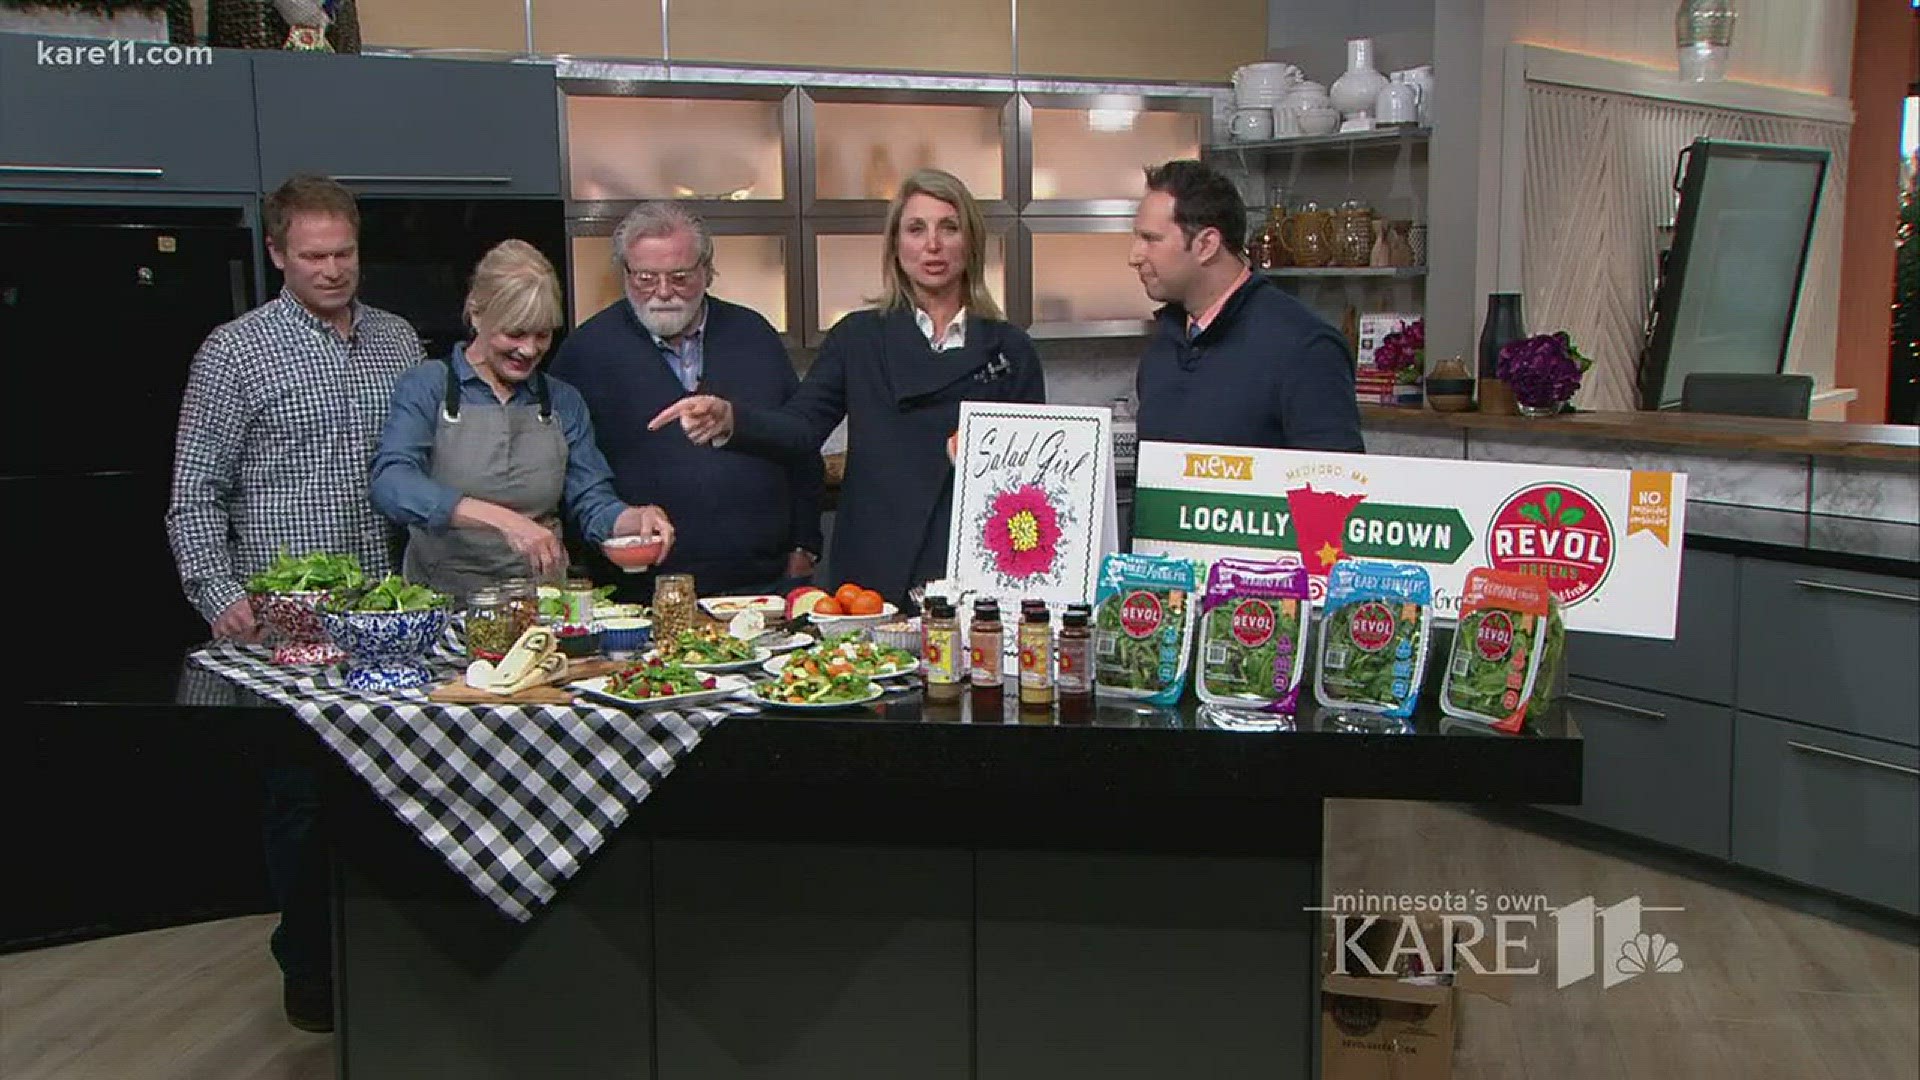 Jay Johnson from Revol Green and Pam Powell from Salad Girl bring together their wonderful Minnesota made products to our kitchen to share with you tasty recipes you can make at home.